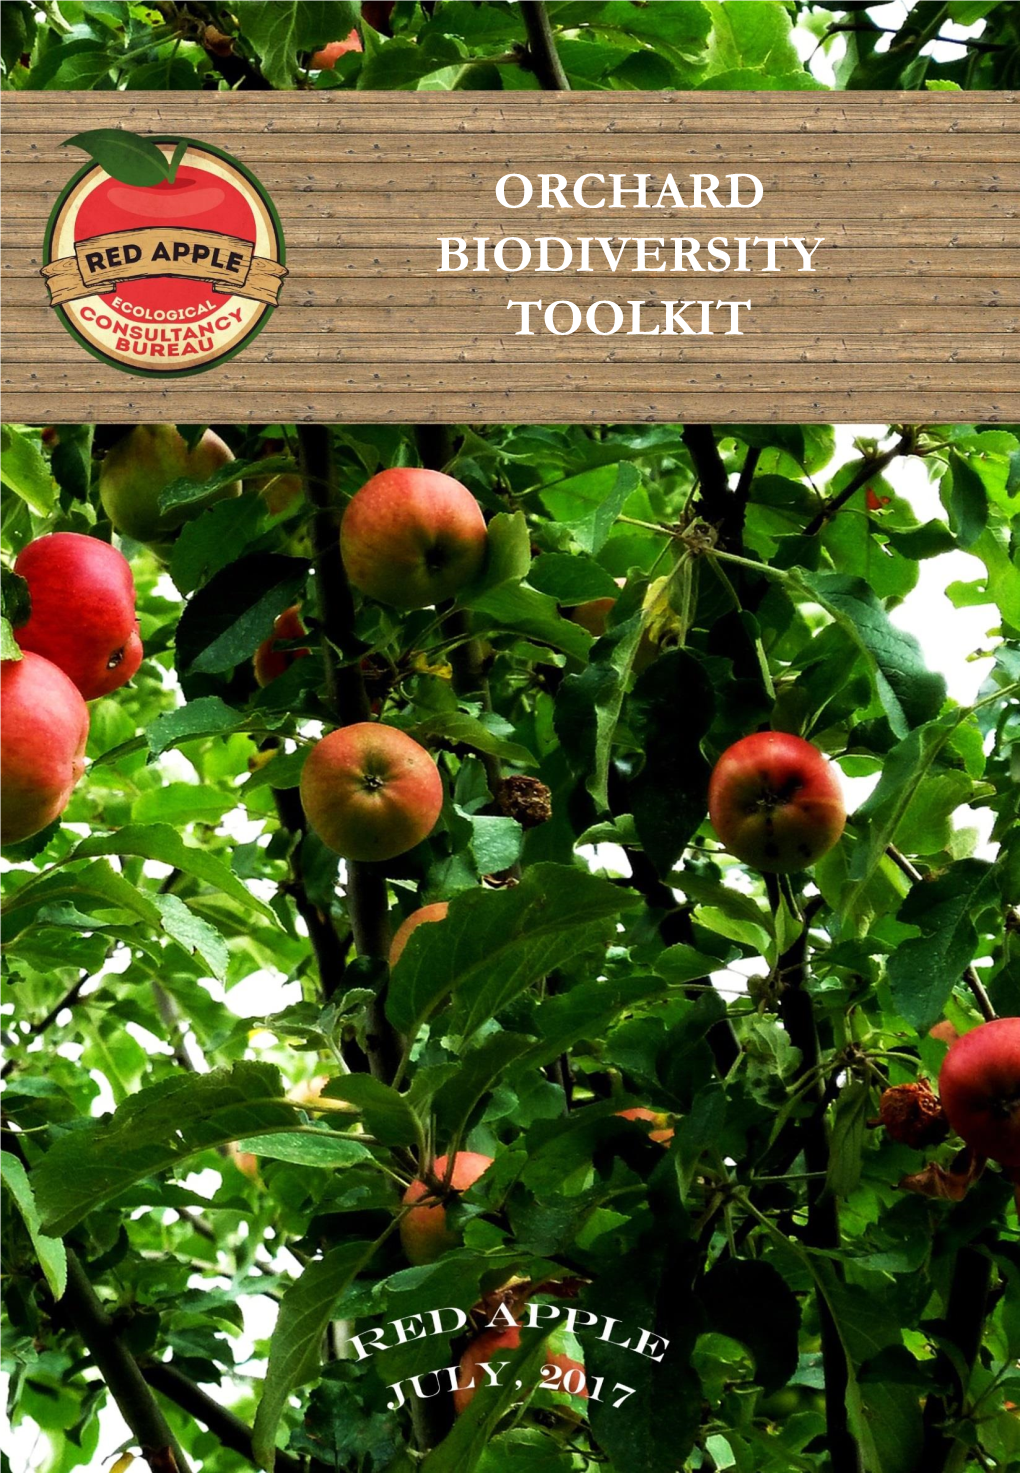 ORCHARD BIODIVERSITY TOOLKIT Welcome to This Toolkit!